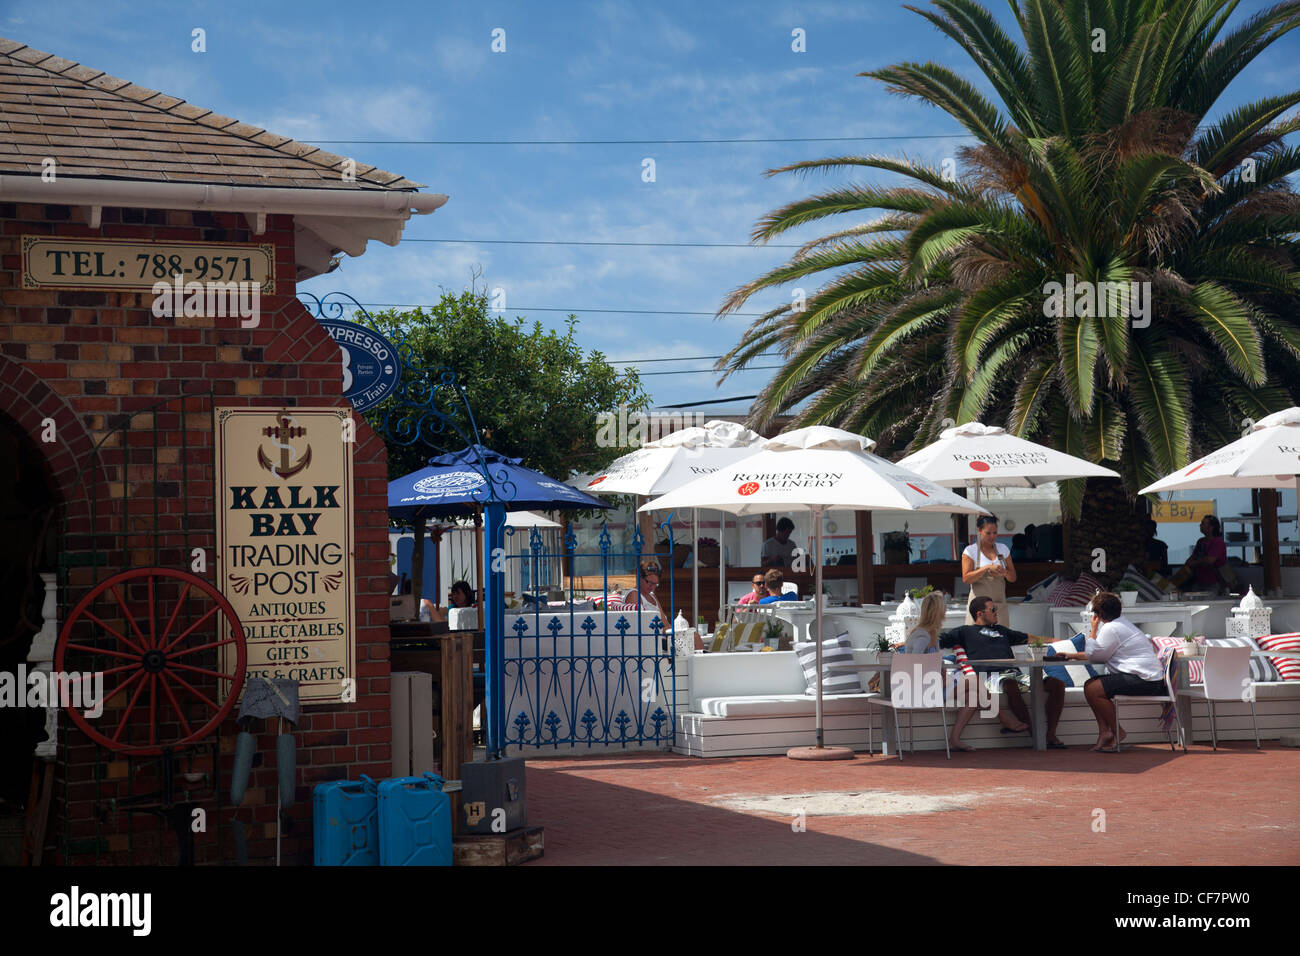 Kalk Bay Promenade with cafe and Trading Post - Cape Town Stock Photo